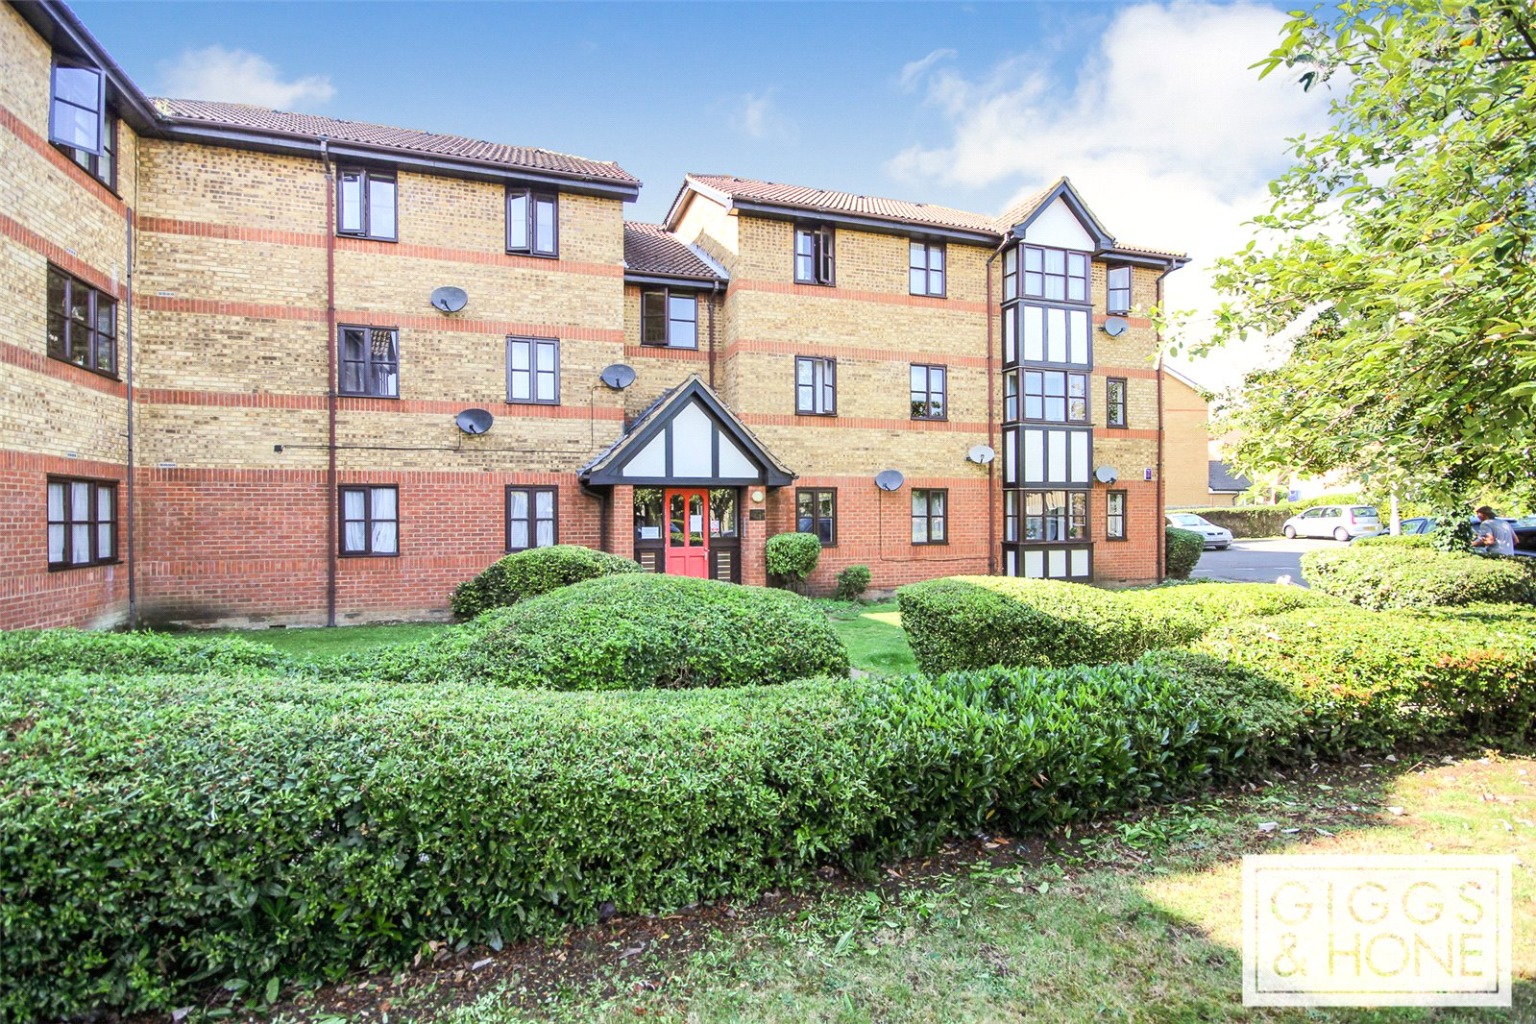 Immaculate two bedroom second floor flat located in the popular Redwood Grove development which is conveniently located close to Bedford Town Centre and Bedford Hospital.